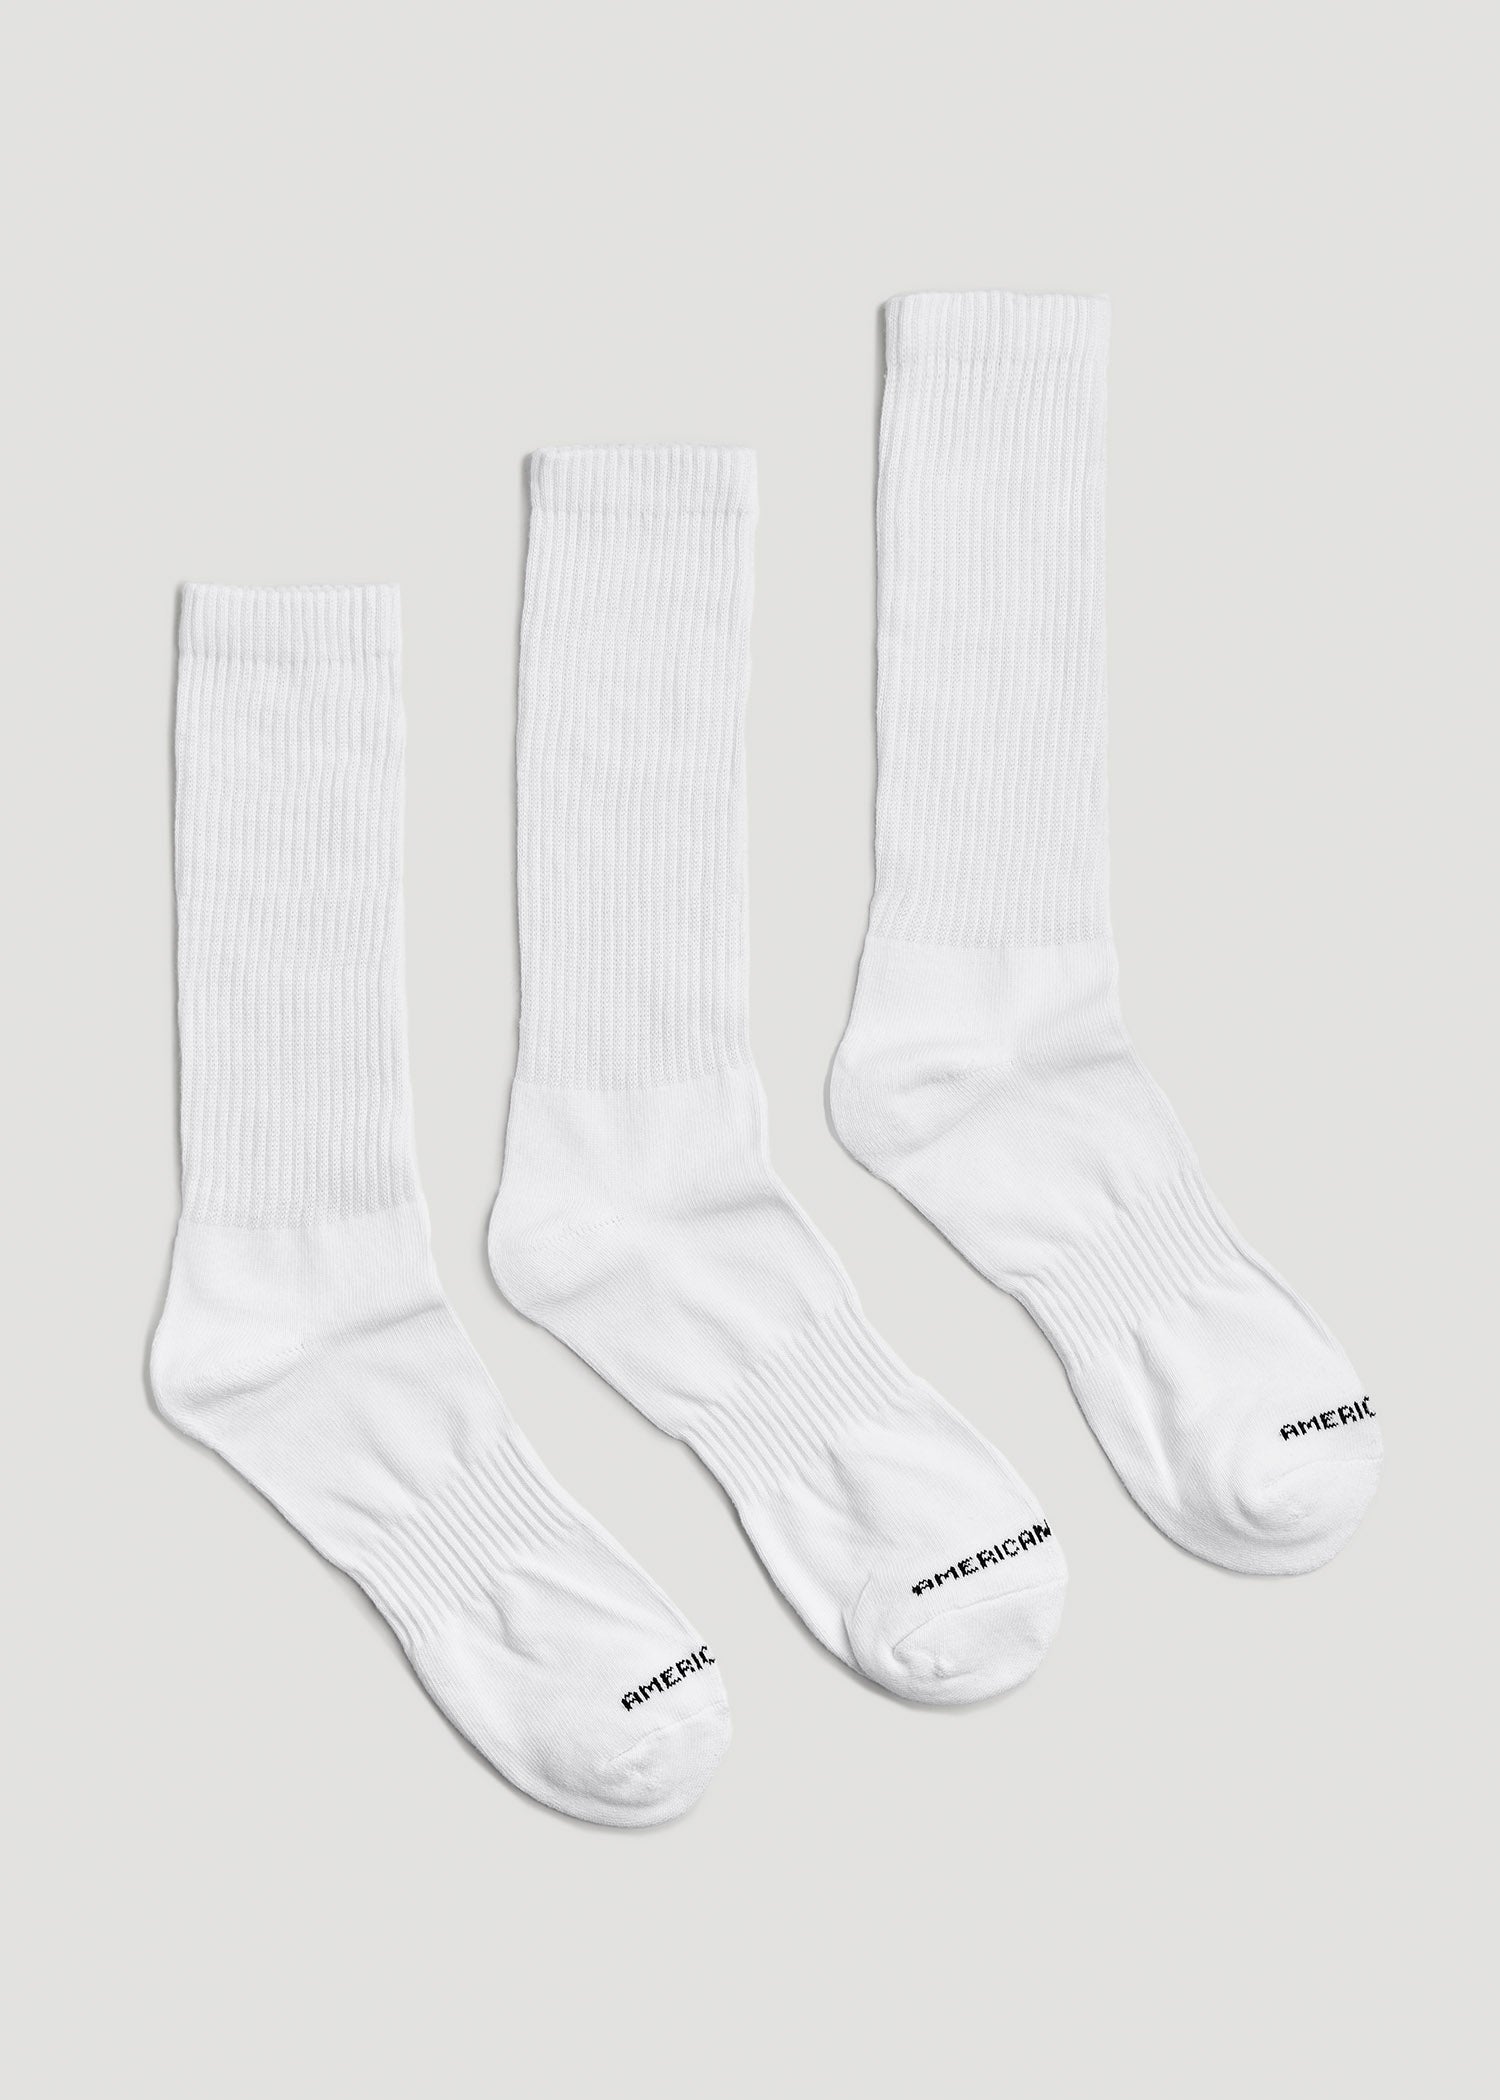    American-Tall-Mens-Athletic-Crew-Socks-X-Large-Size-14-17-White-3-Pack-Detail2